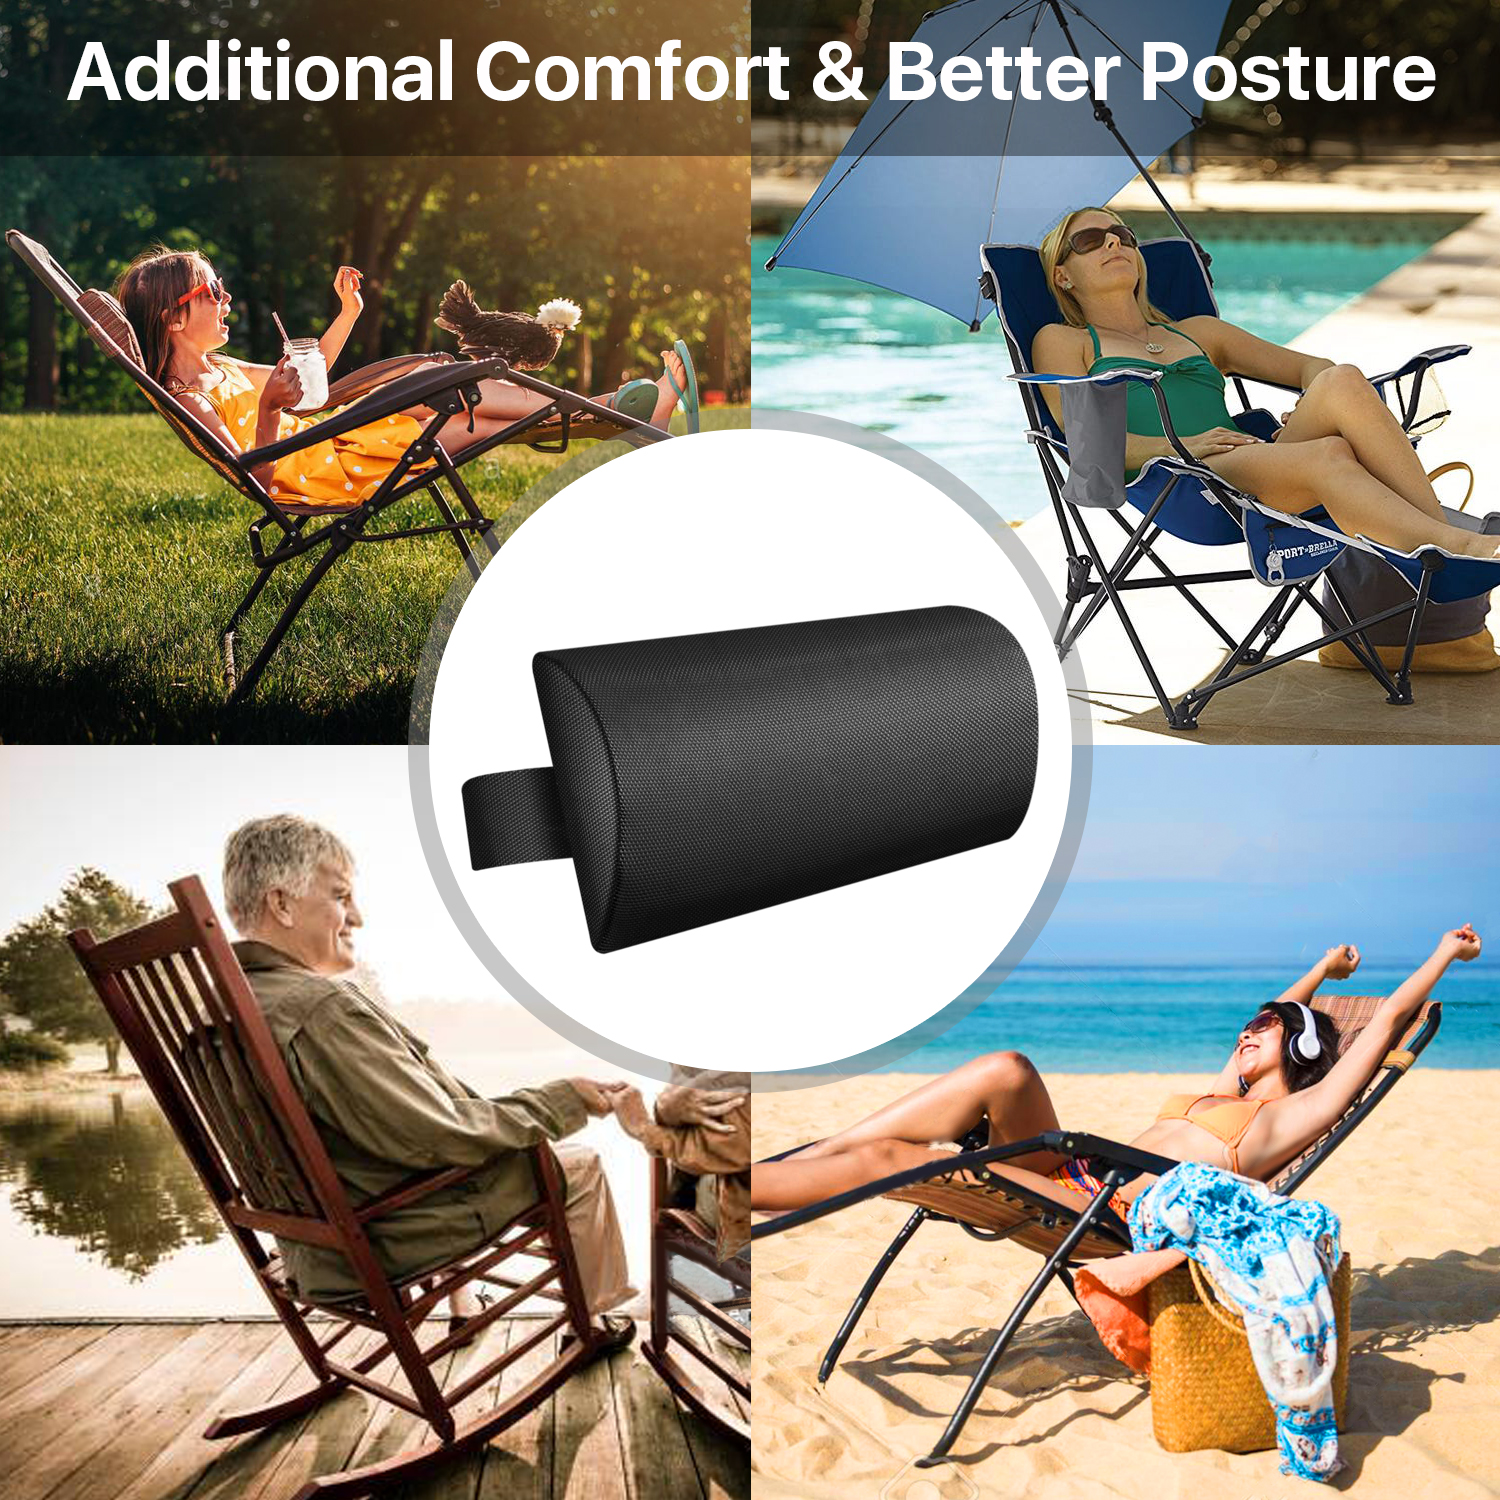 Universal Headrest Pillow Replacement for Zero Gravity Office Reclining Lawn Patio Lounge Folding Chair Neck Head Lumbar Pillow with Adjustable Elastic Band up to 20in/50cm Wide (Black) - image 5 of 7